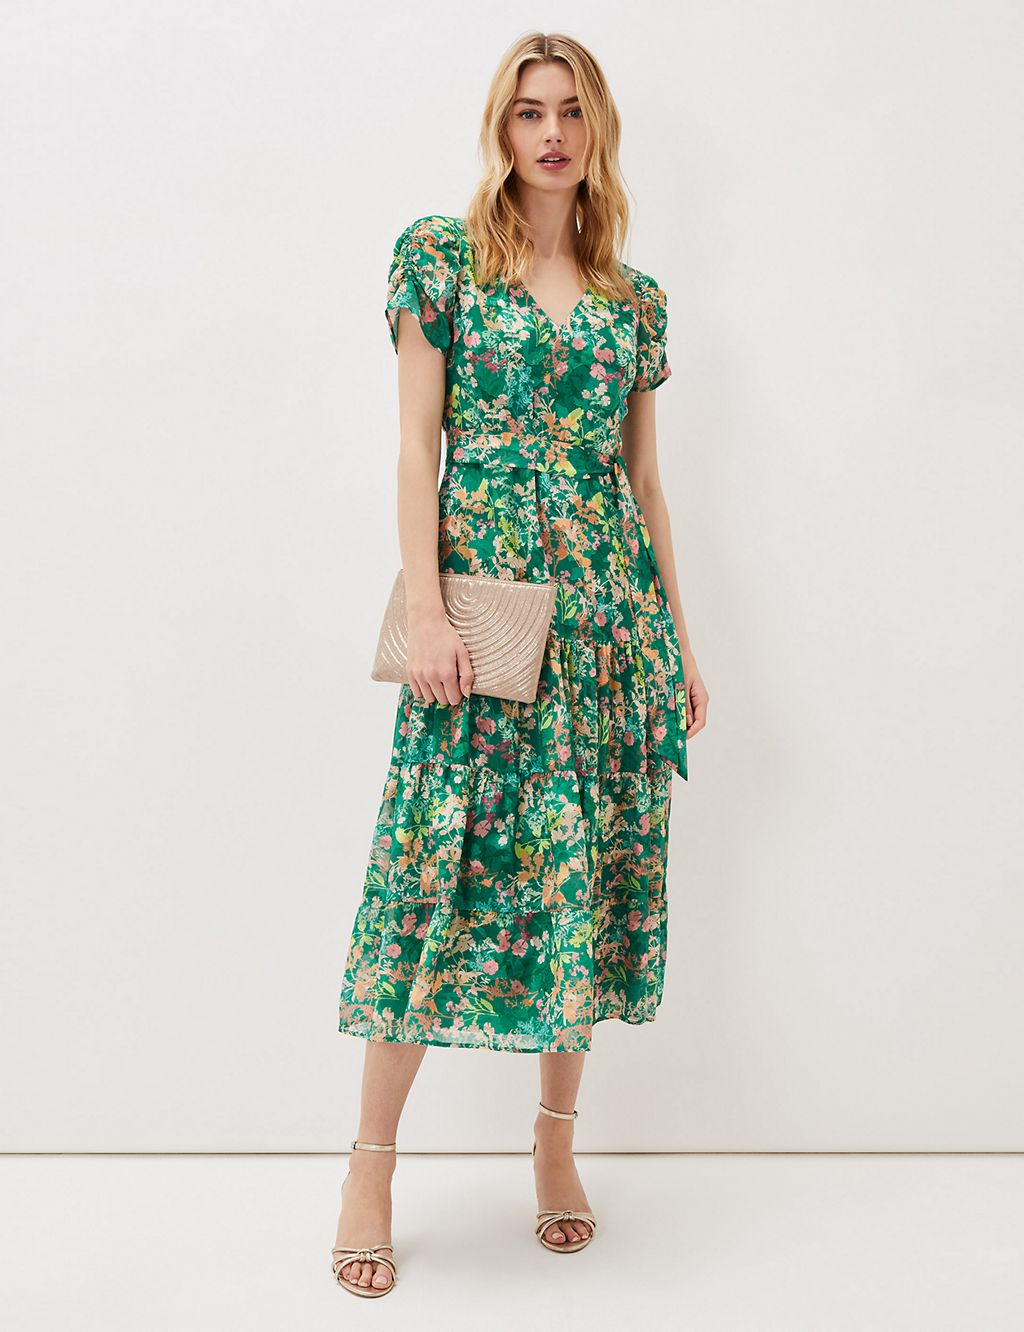 Printed V-Neck Knee Length Tiered Dress | Phase Eight | M&S